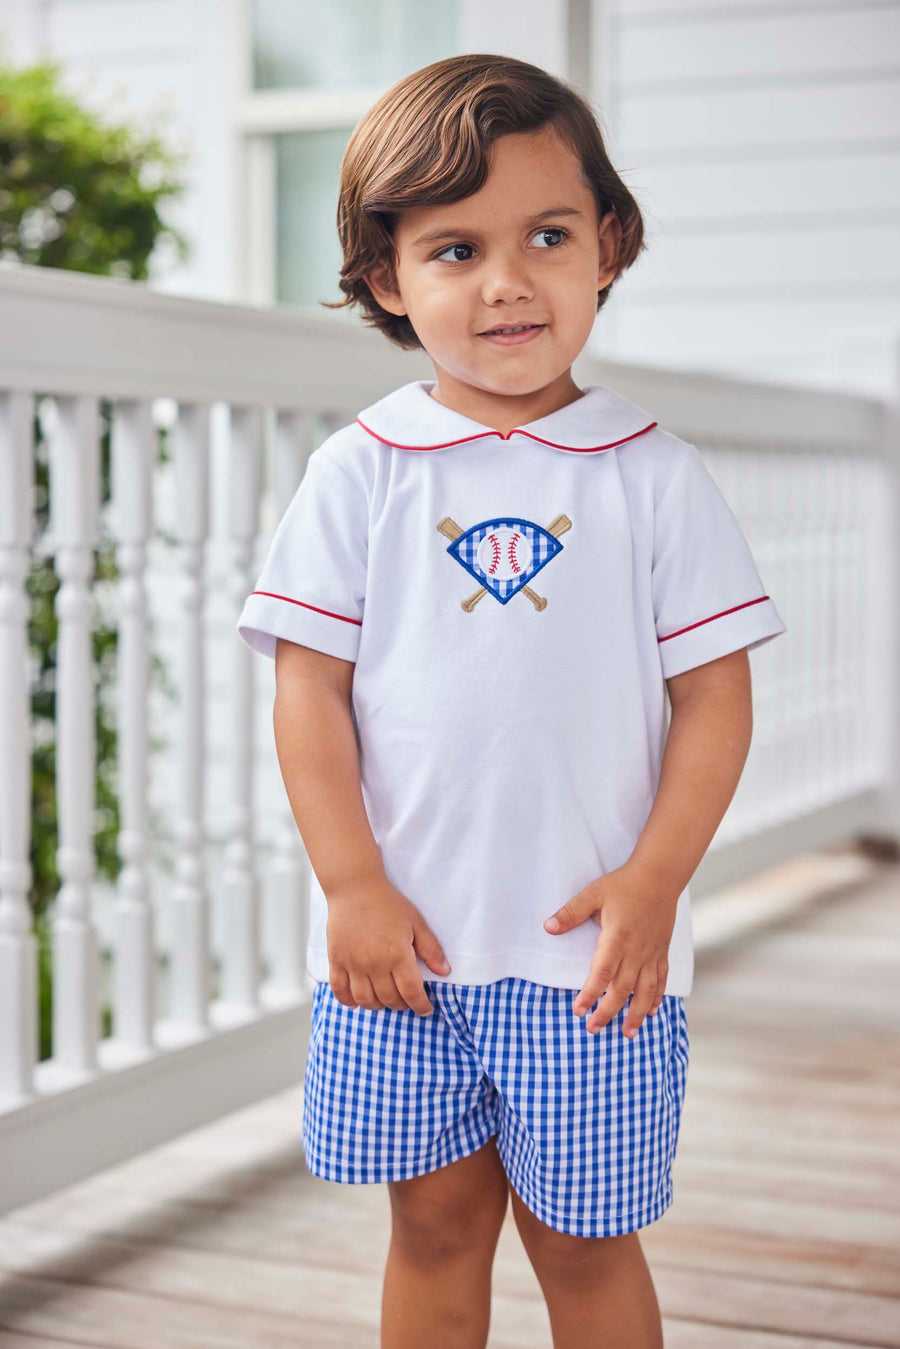 classic childrens clothing boy peter pan short set with blue gingham shorts and piped peter pan shirt with baseball applique